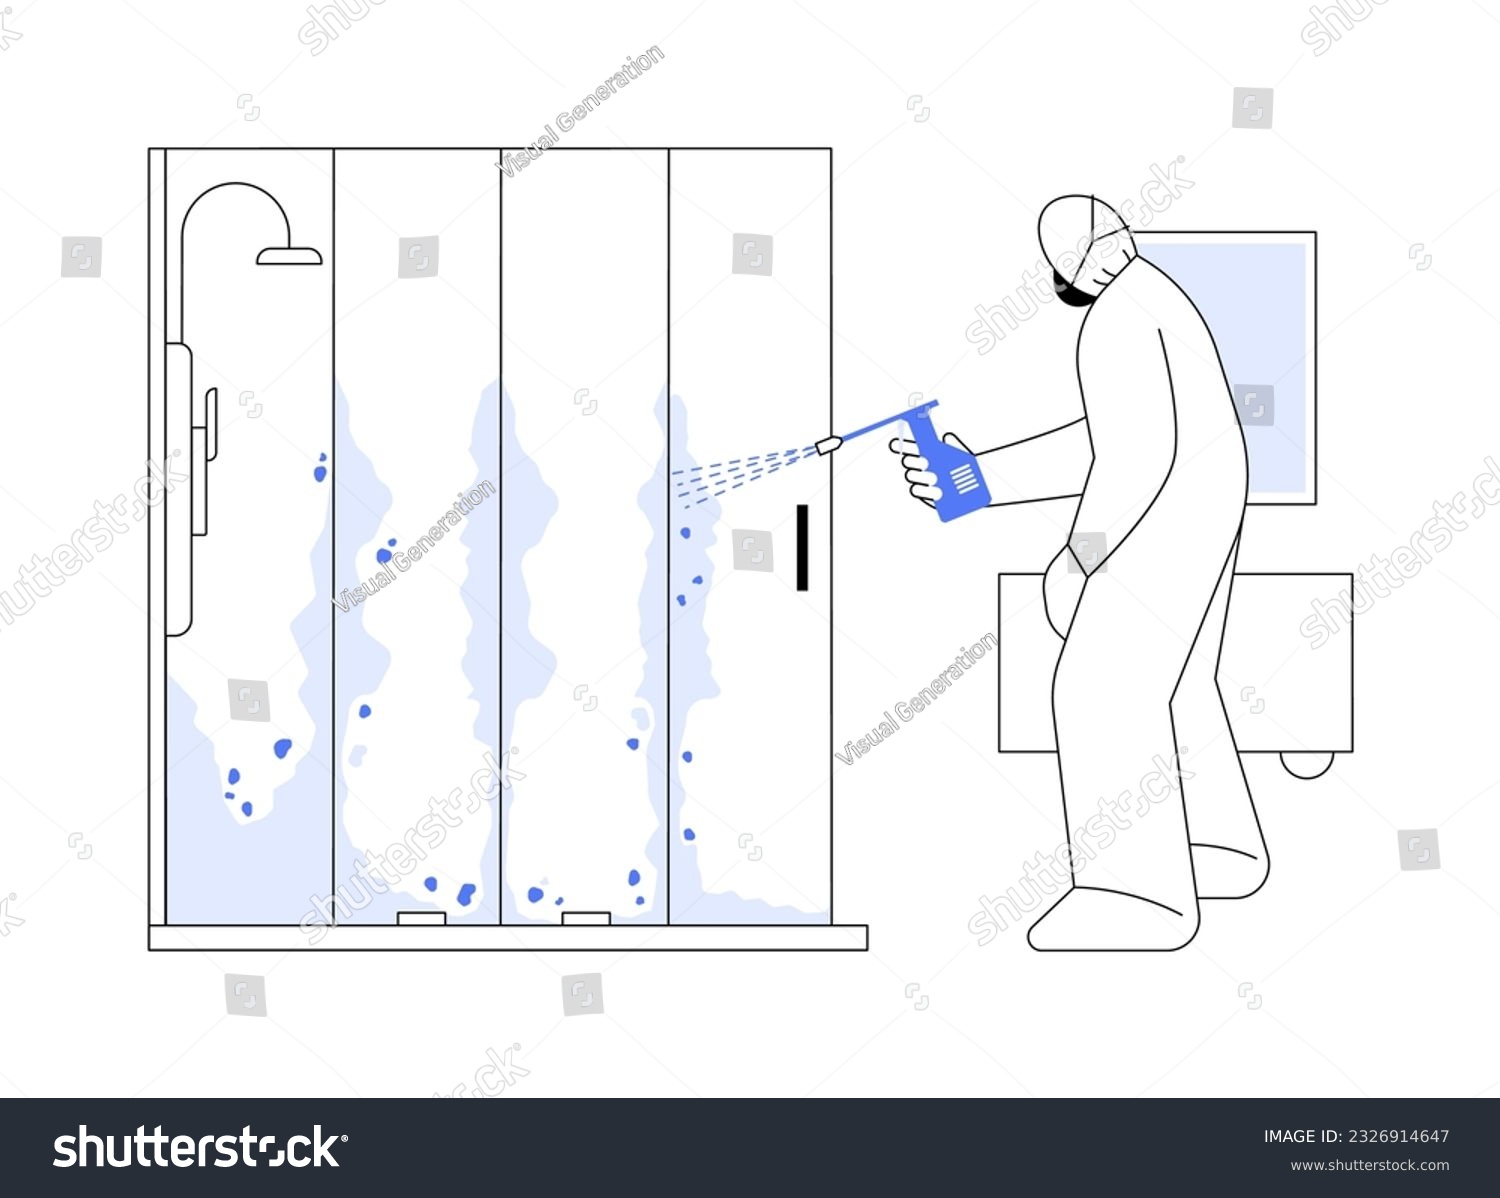 SVG of Applying biocide abstract concept vector illustration. Person in protective suit removing mold using biocide, private house maintenance service, remediation in construction abstract metaphor. svg